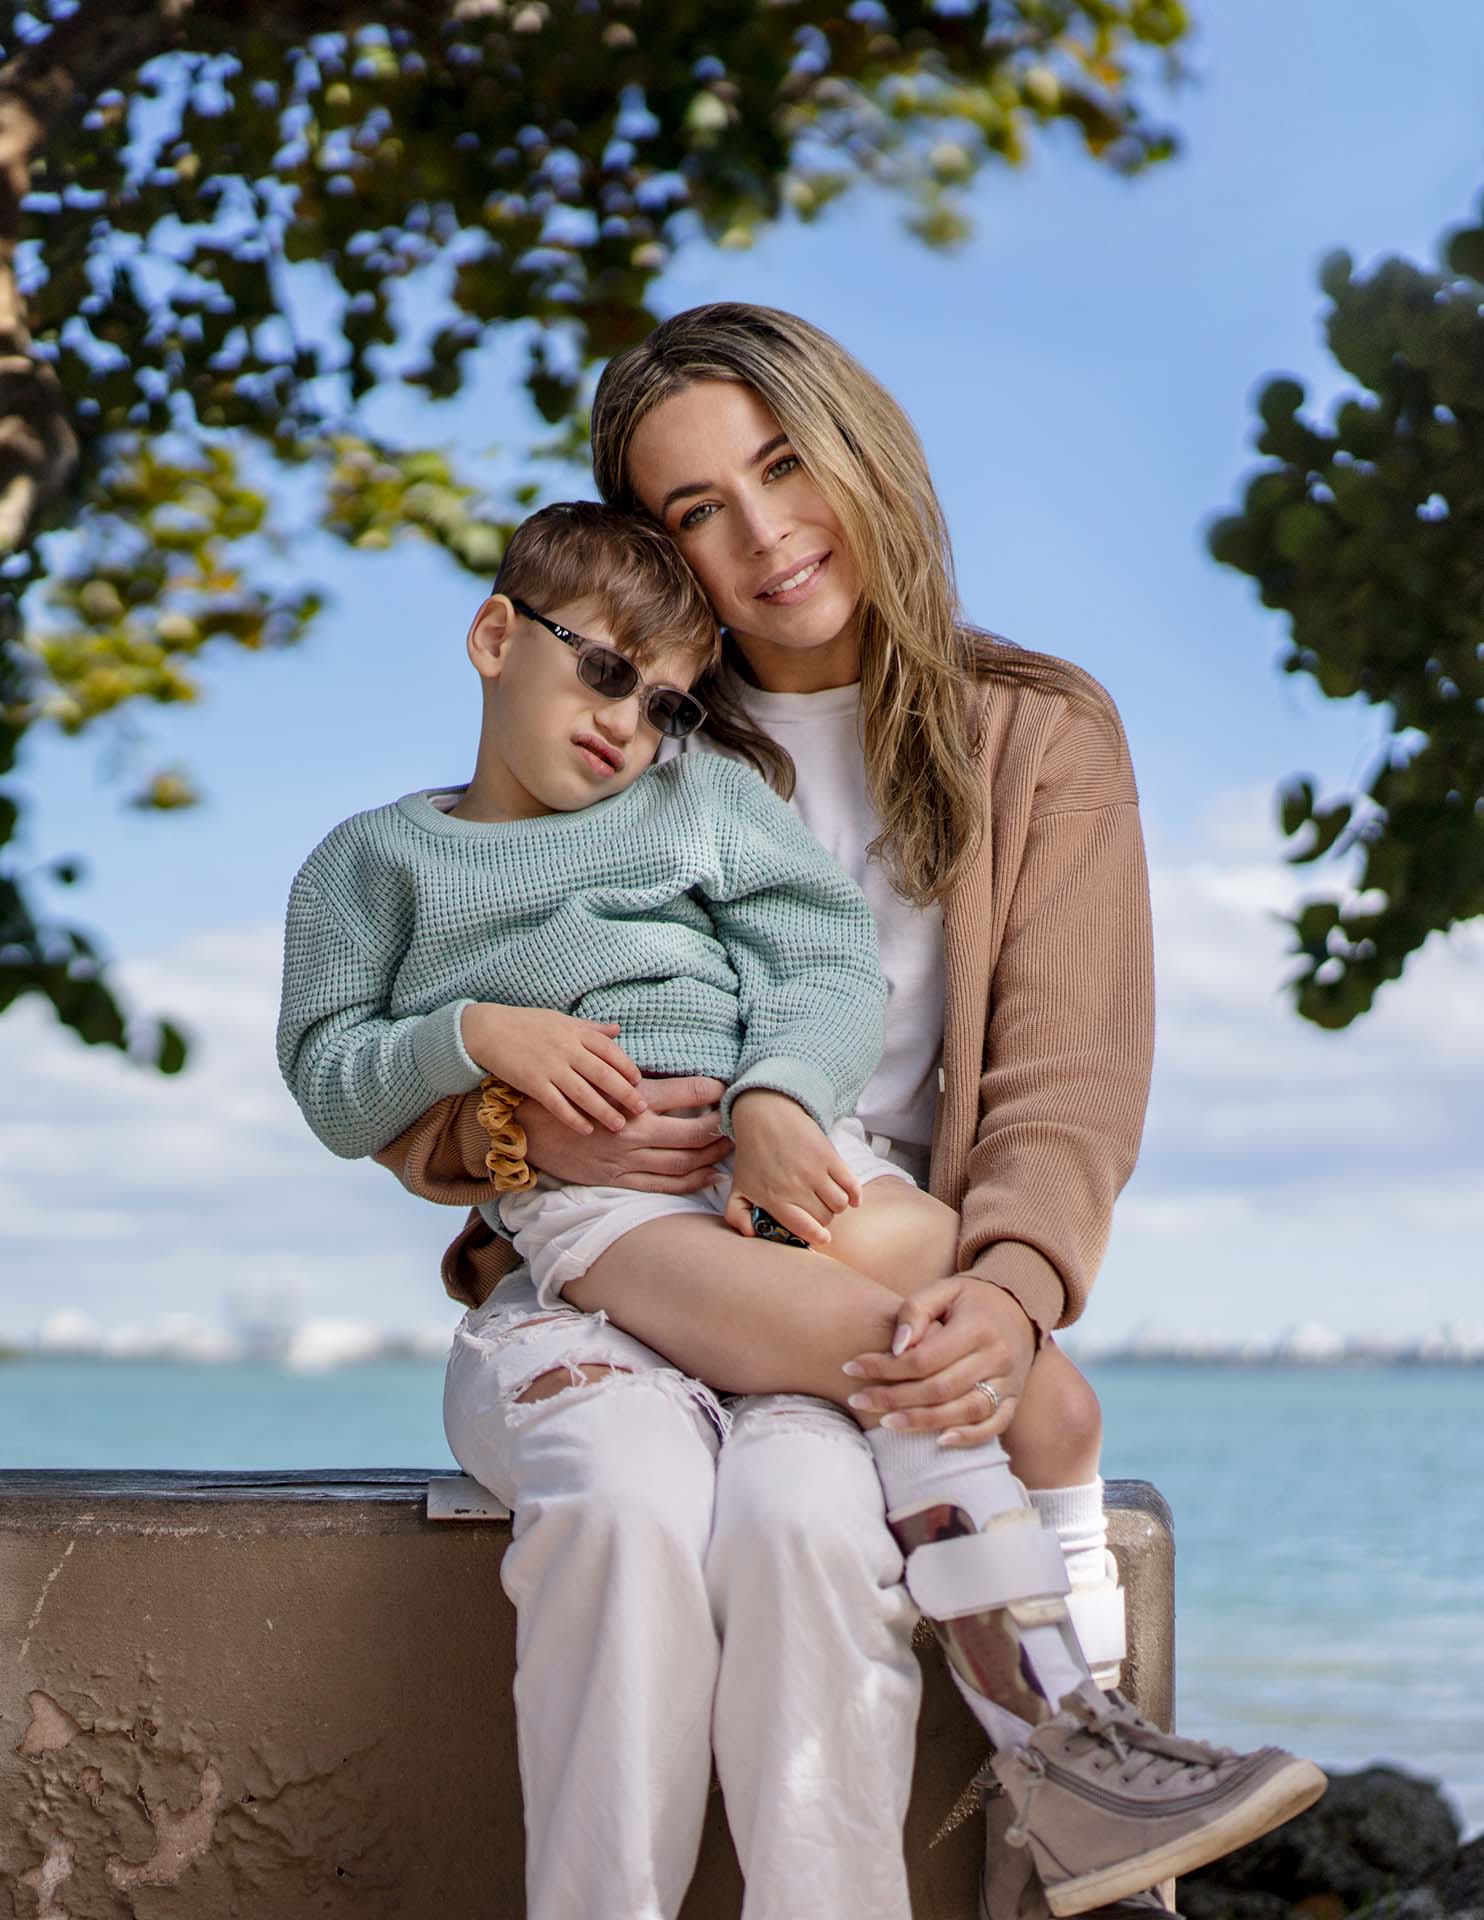 Woman poses for a photo with her son at the beach